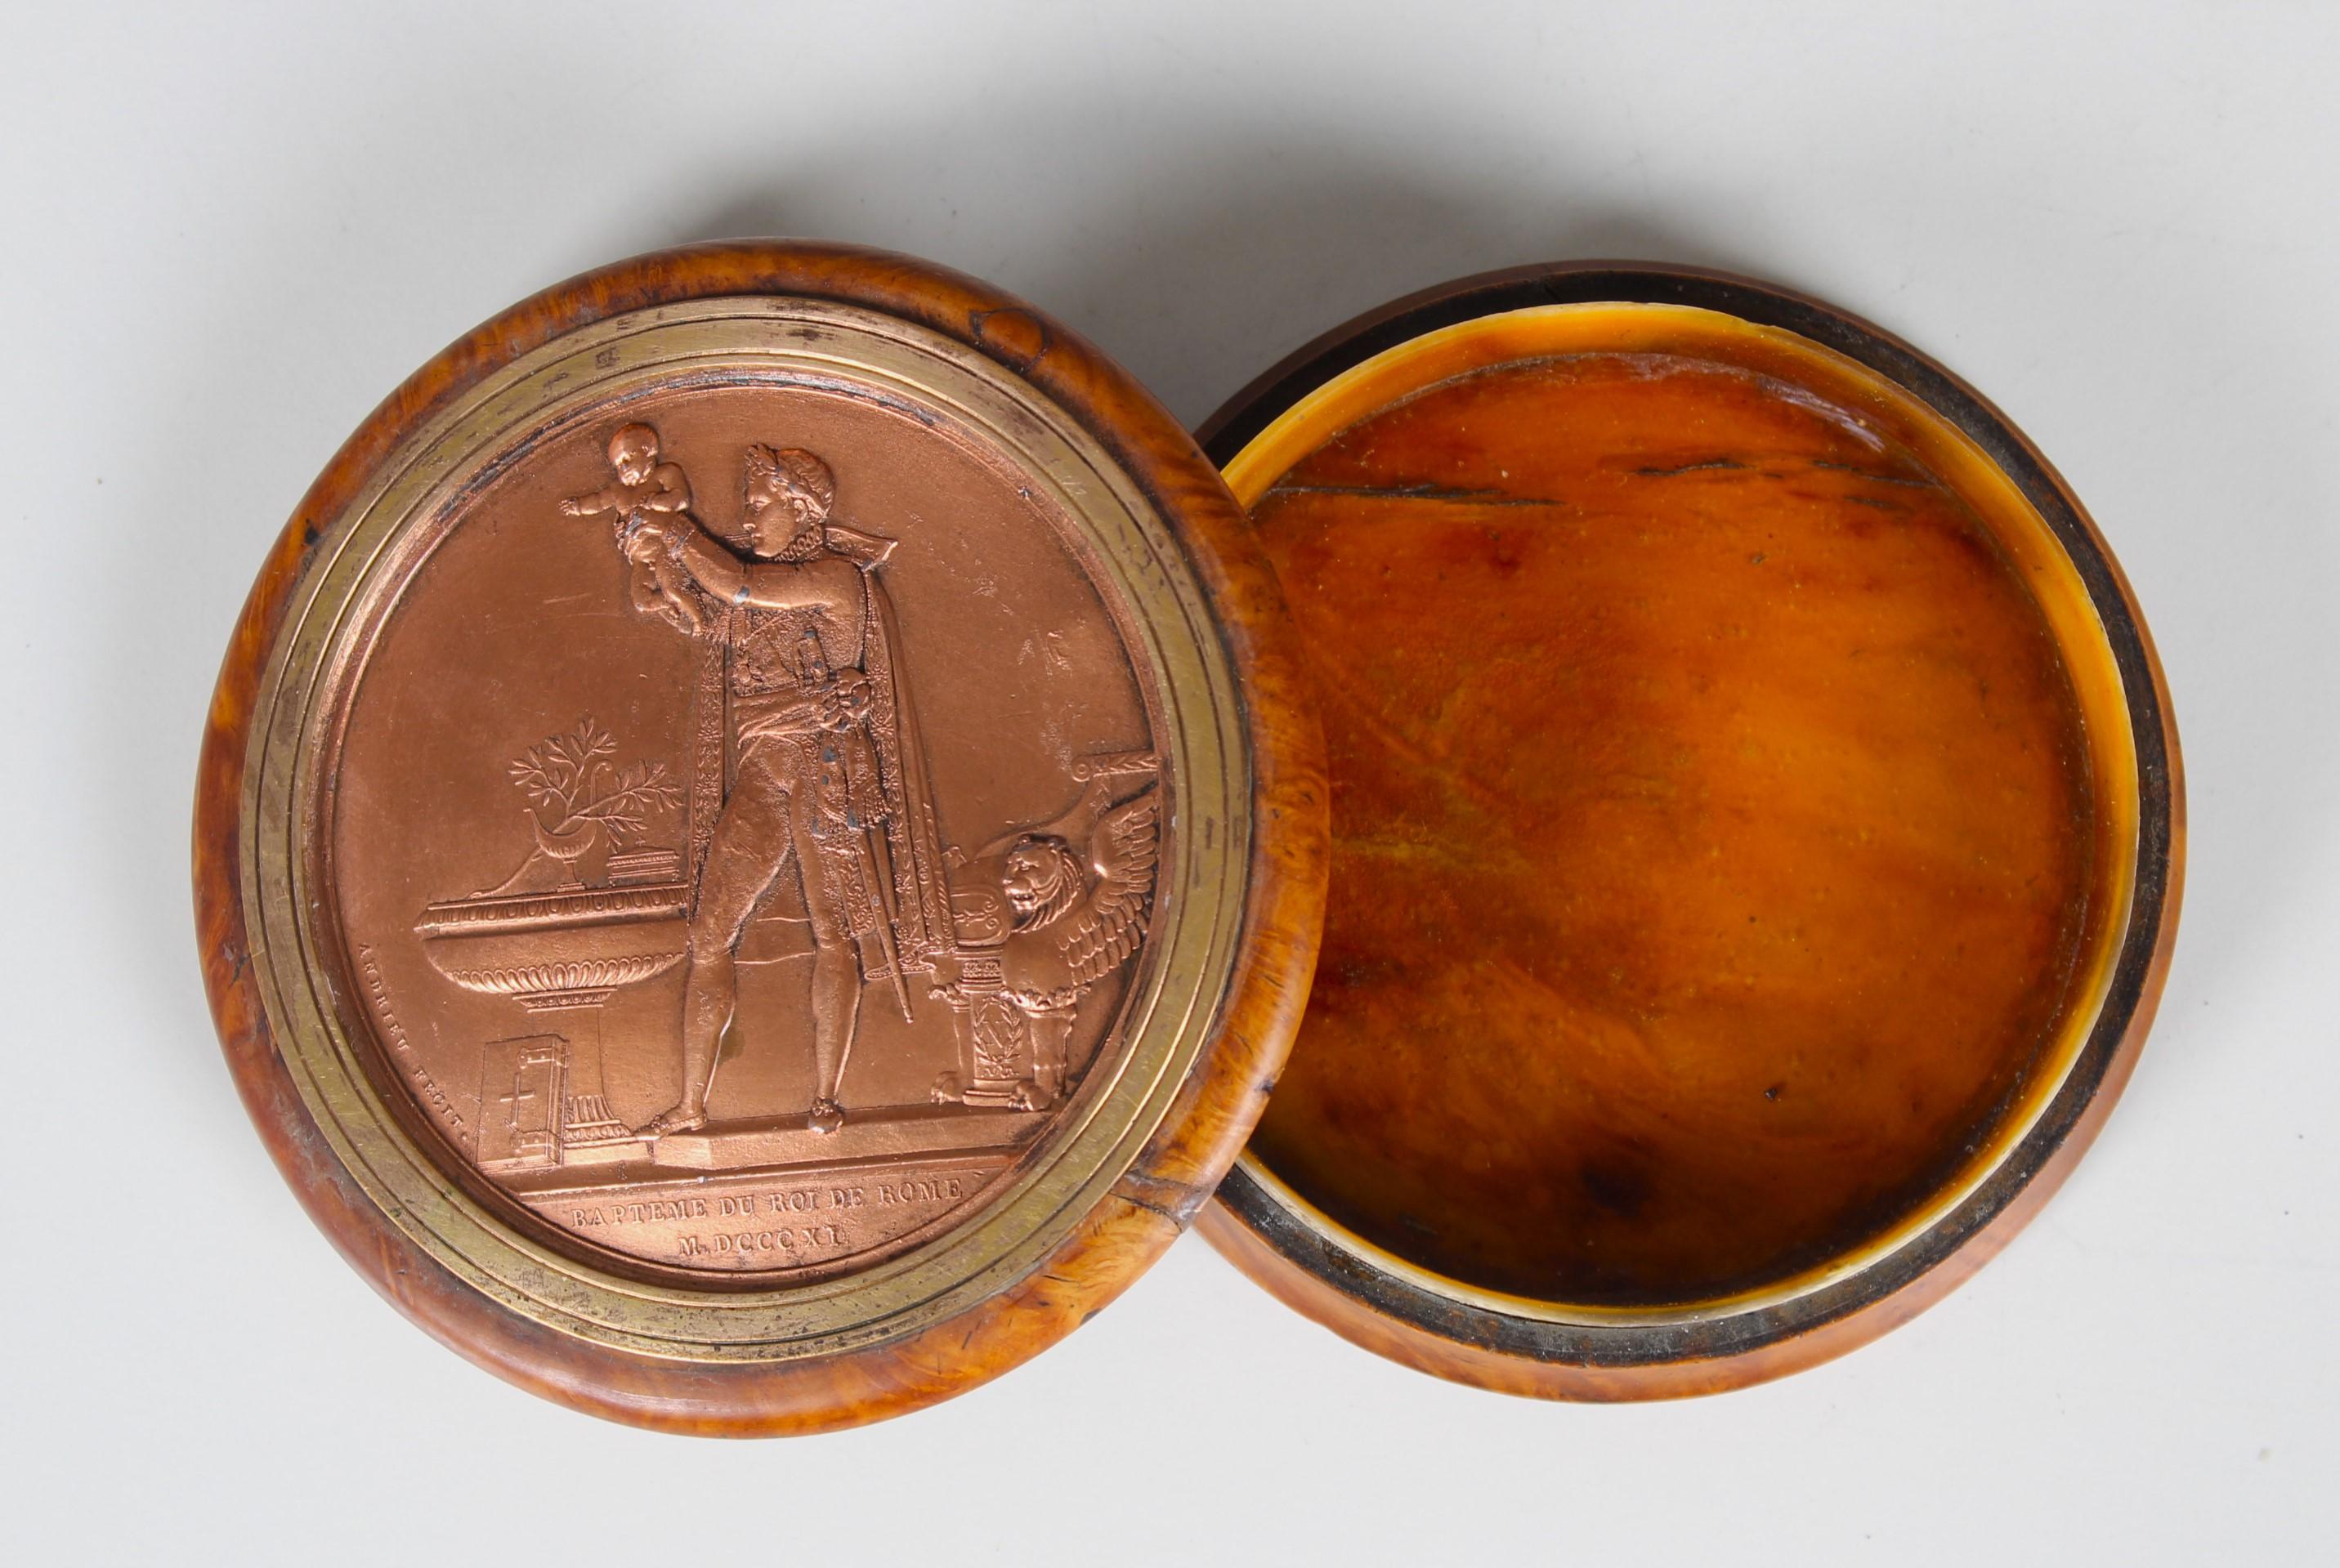 Great little casket for jewelry or other treasures.
The copper lid depicts a royal baptism scene and the inscription
